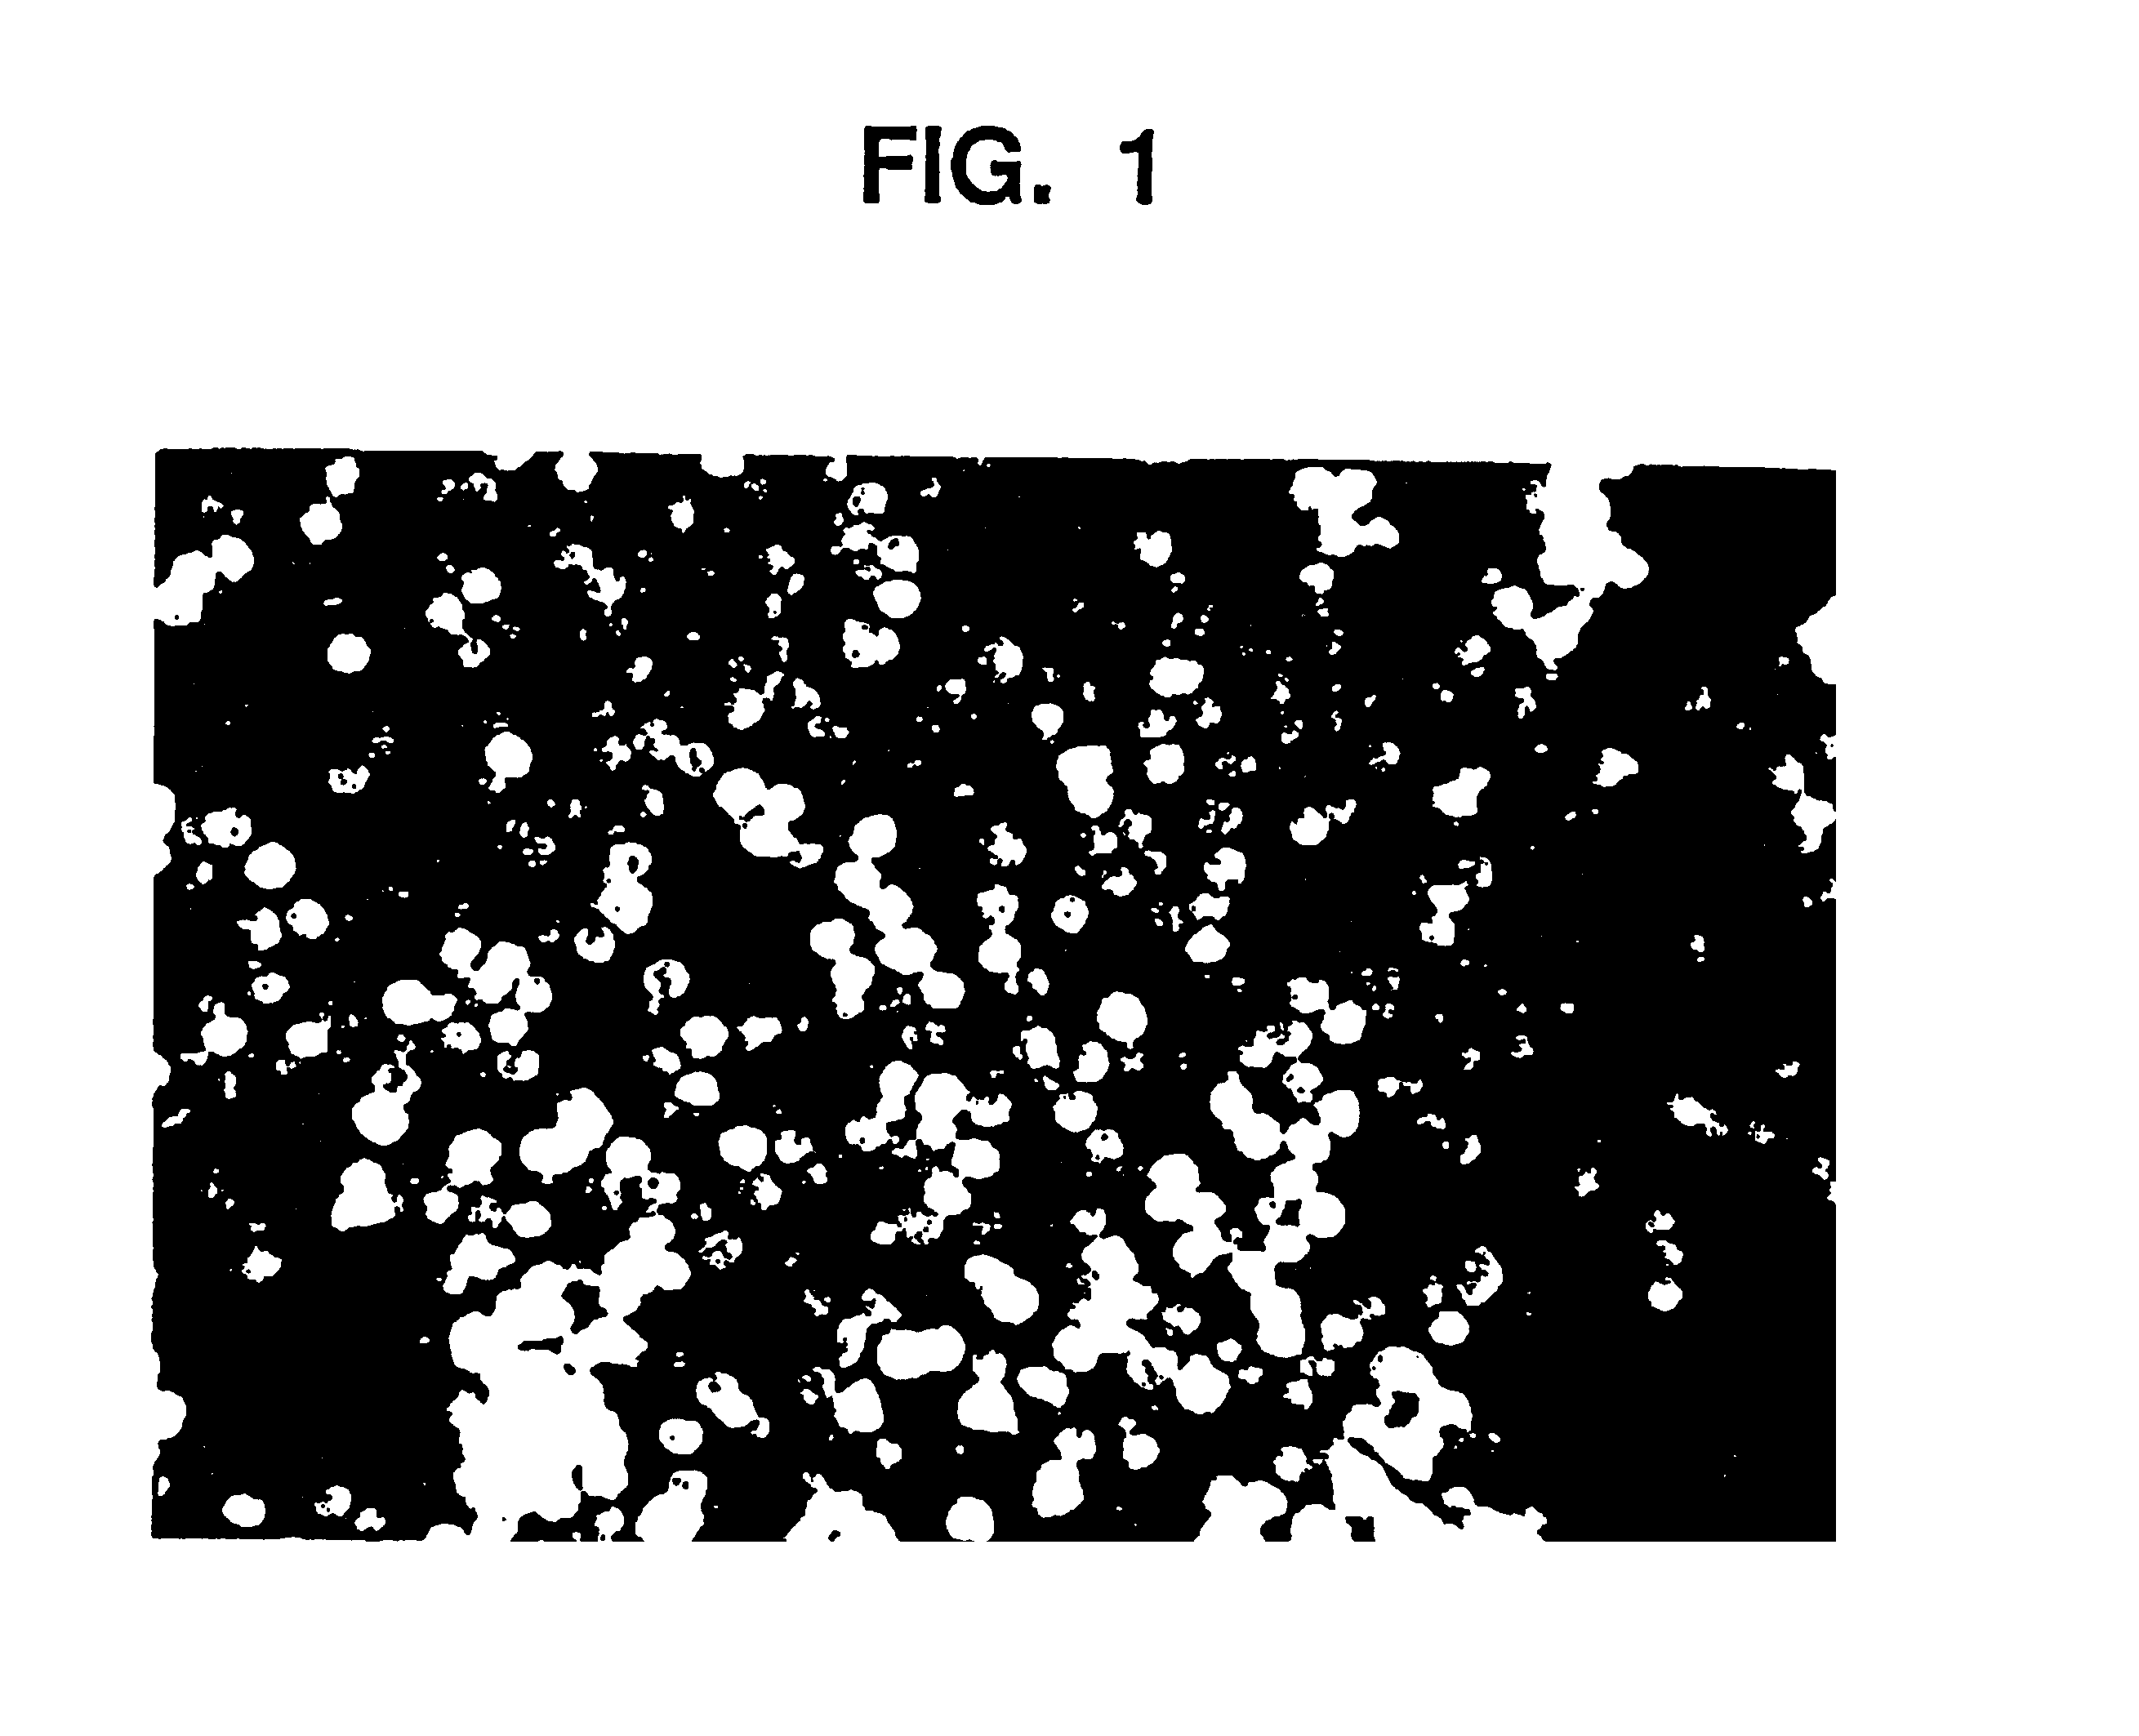 Tissue augmentation material and method